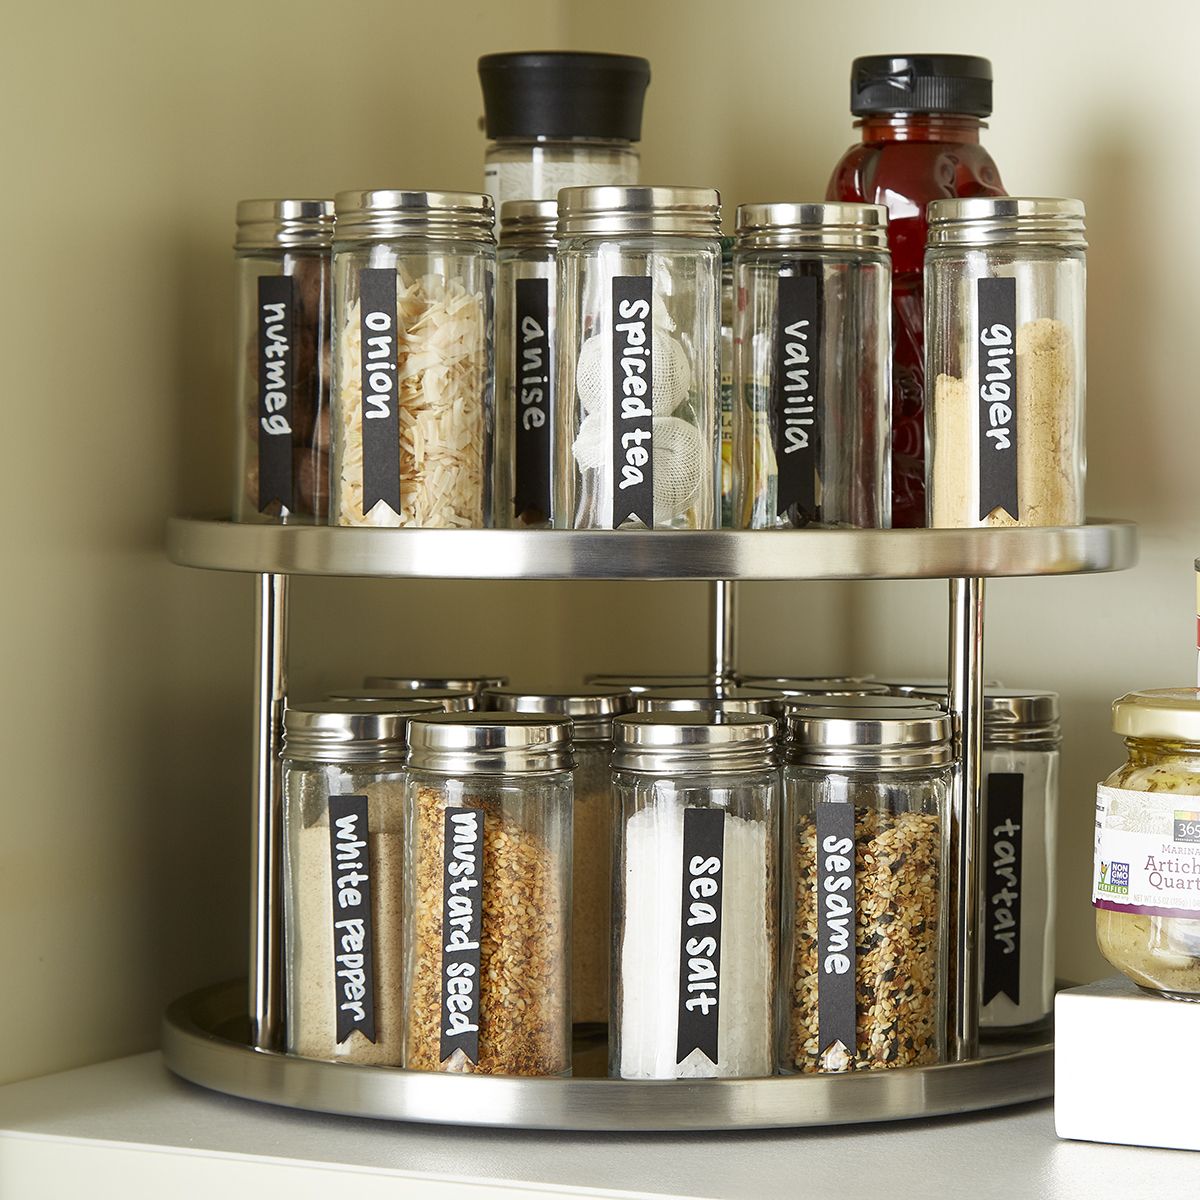 18 Genius Products To Help Organize Your Kitchen